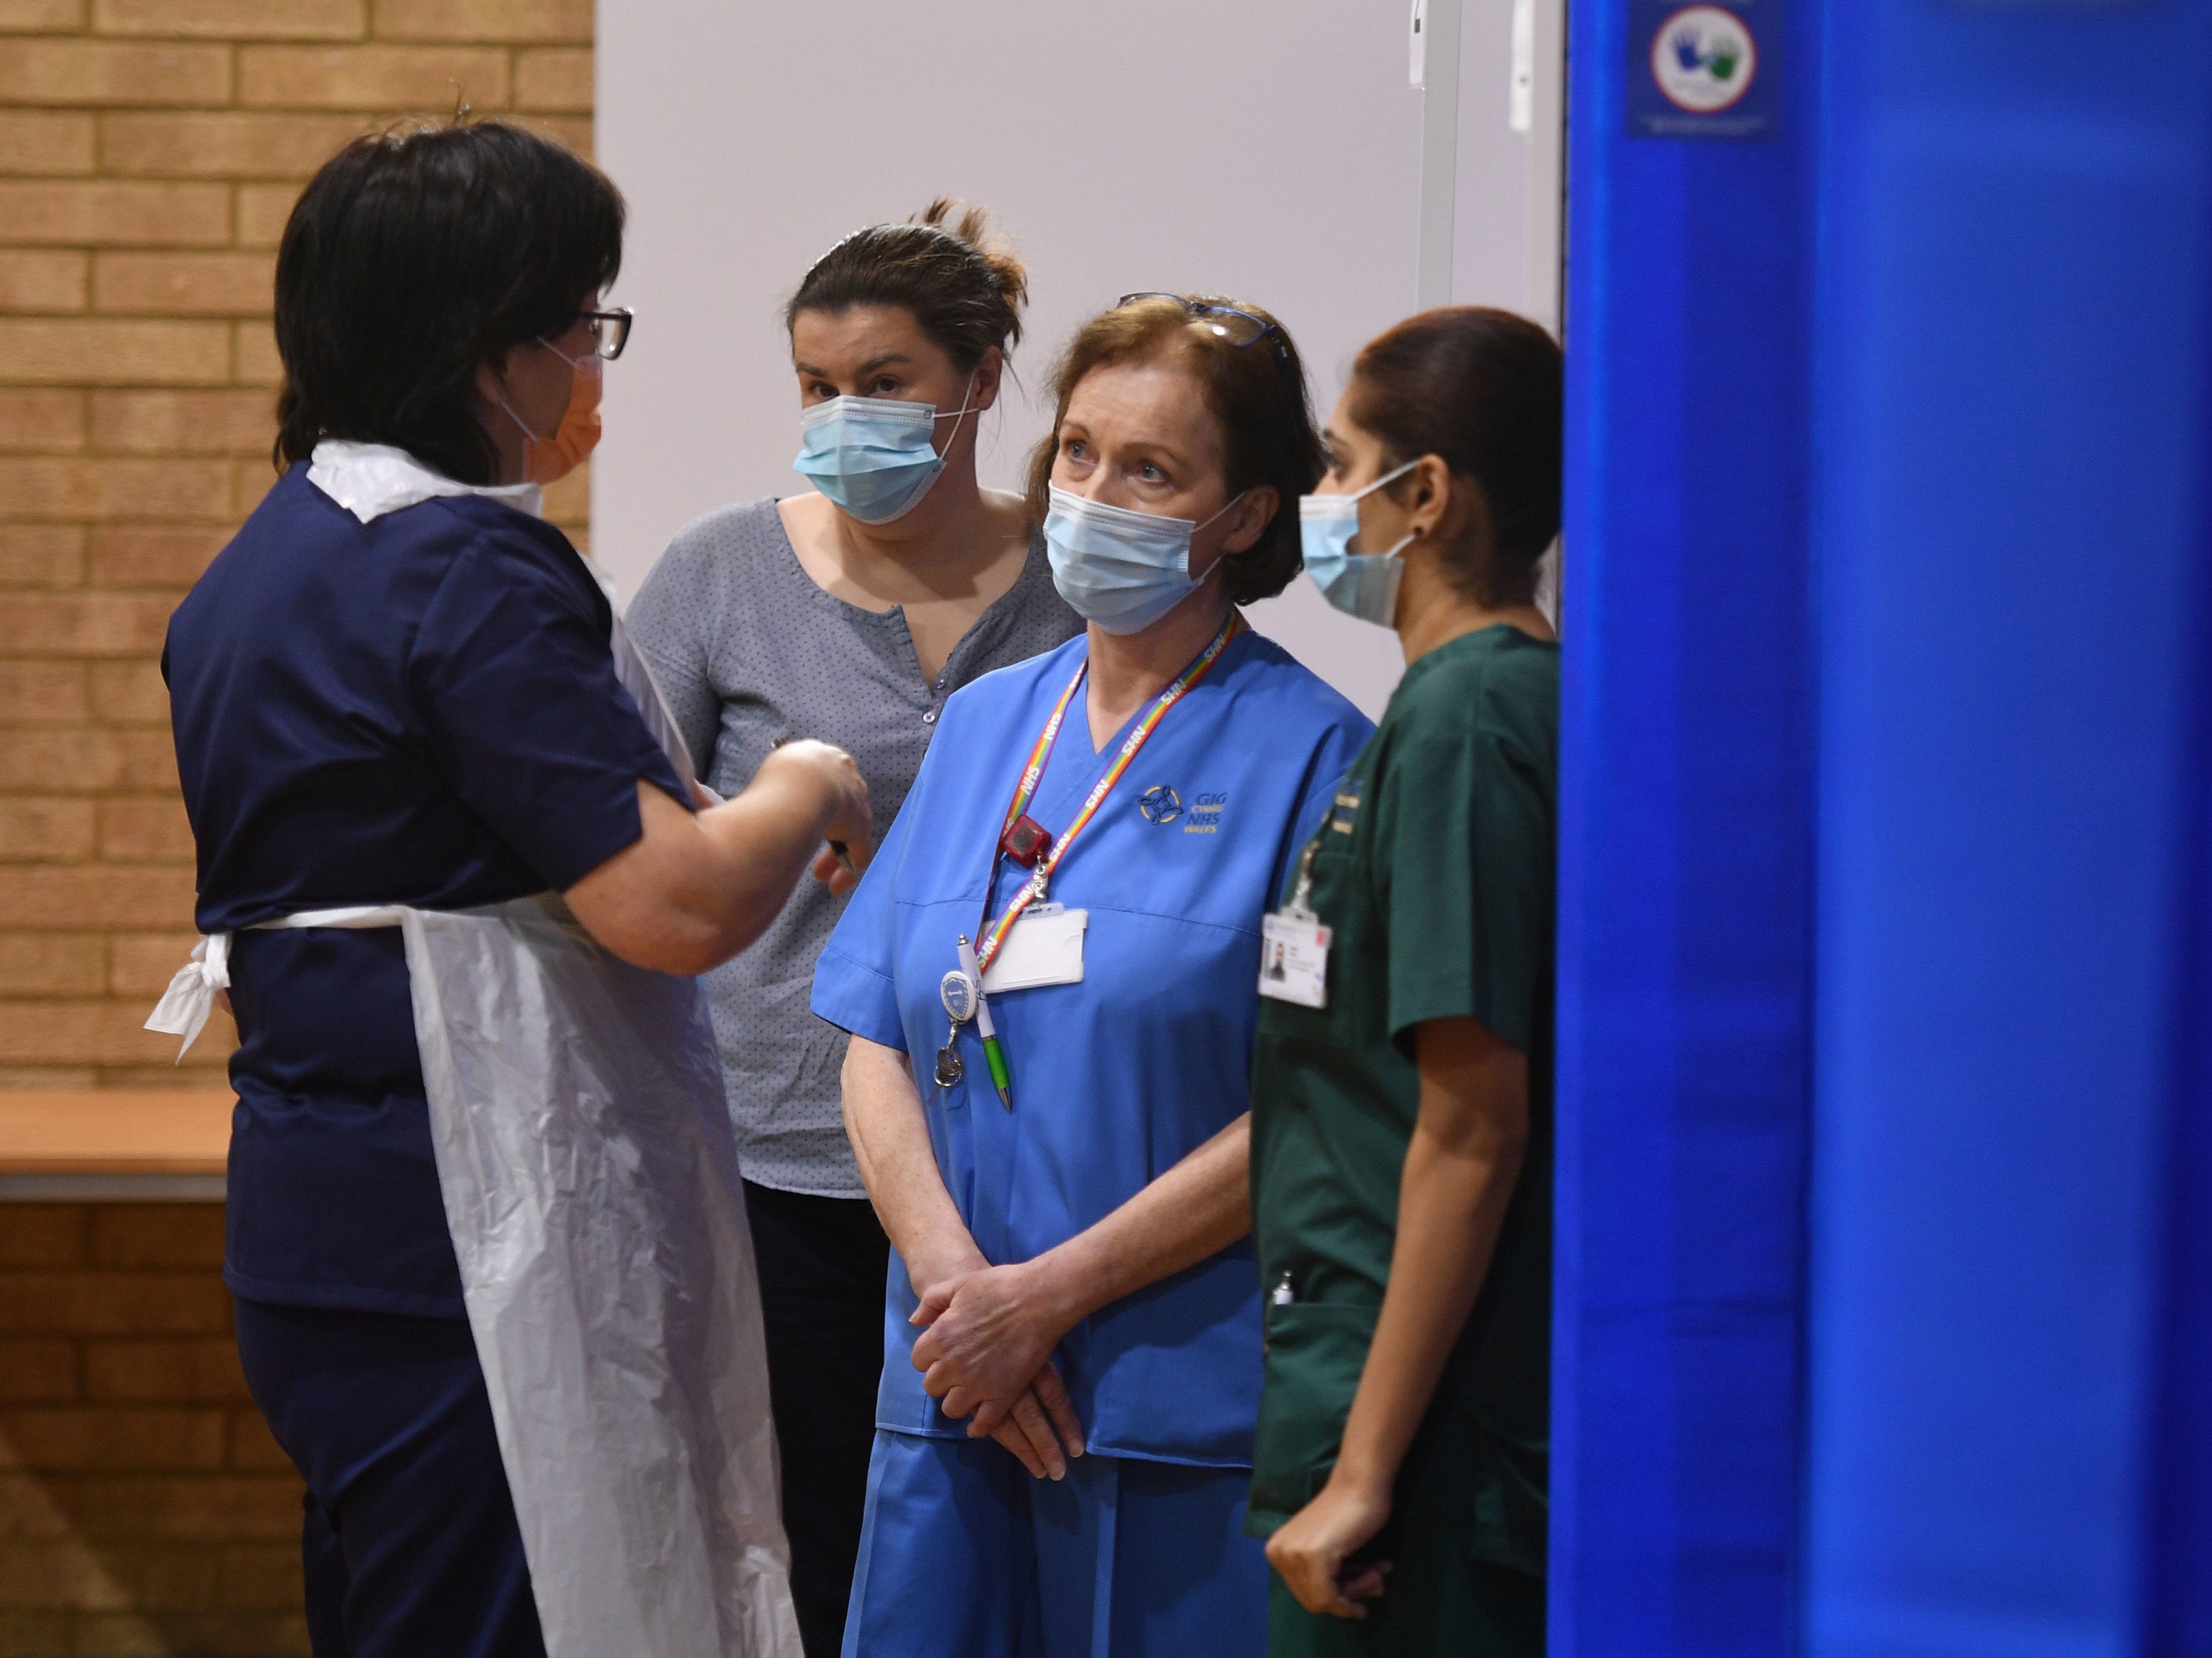 The UK government continued to defend its controversial one per cent pay rise recommendation for NHS staff despite growing anger